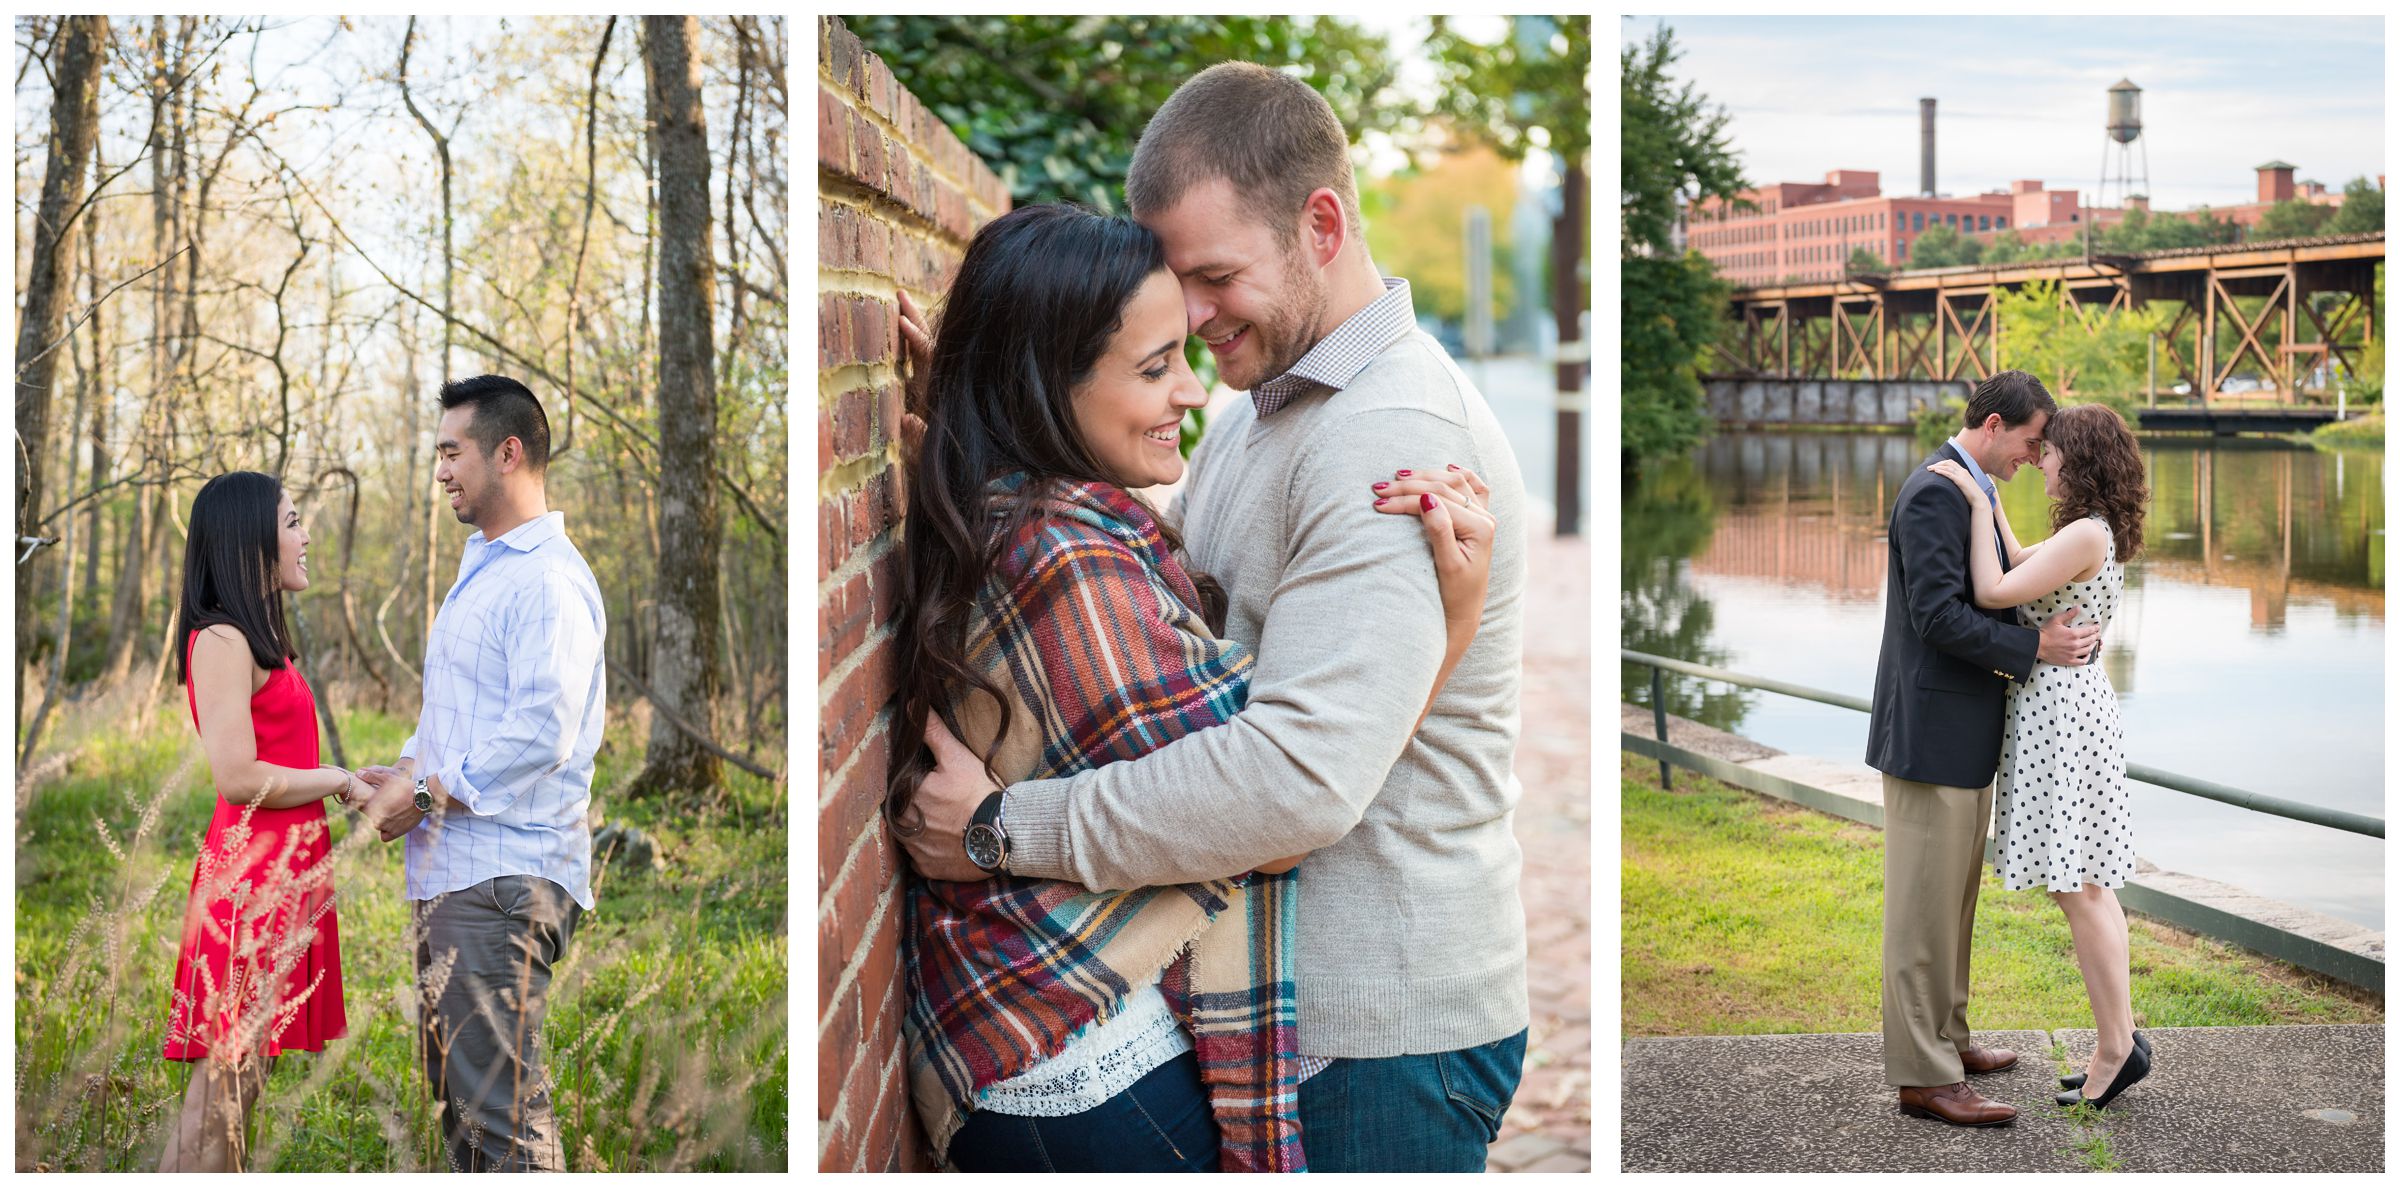 5 tips for a great engagement session